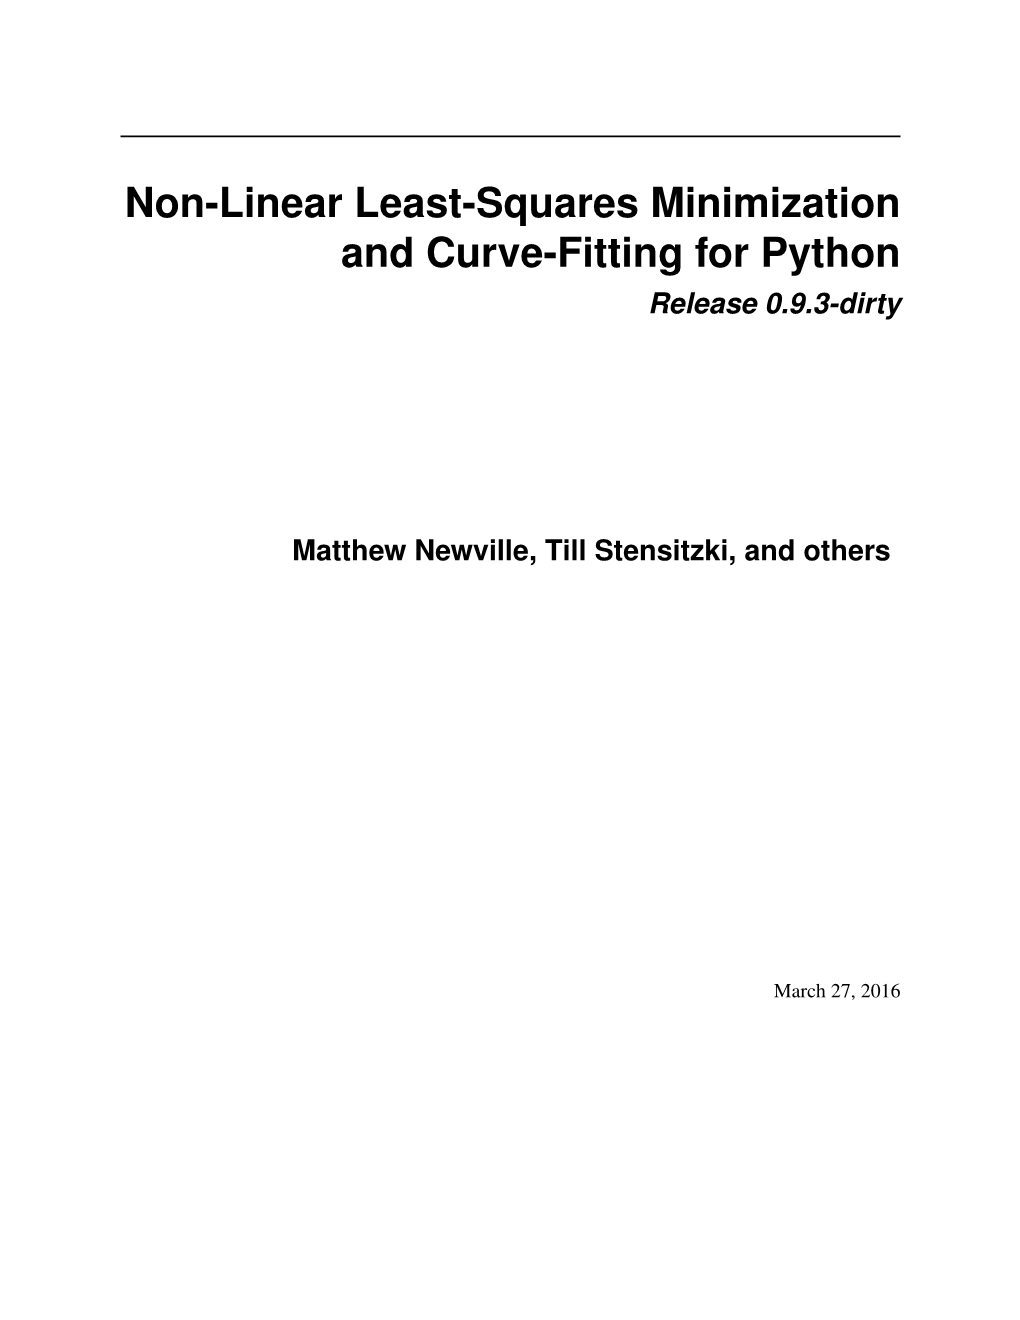 Non-Linear Least-Squares Minimization and Curve-Fitting for Python Release 0.9.3-Dirty